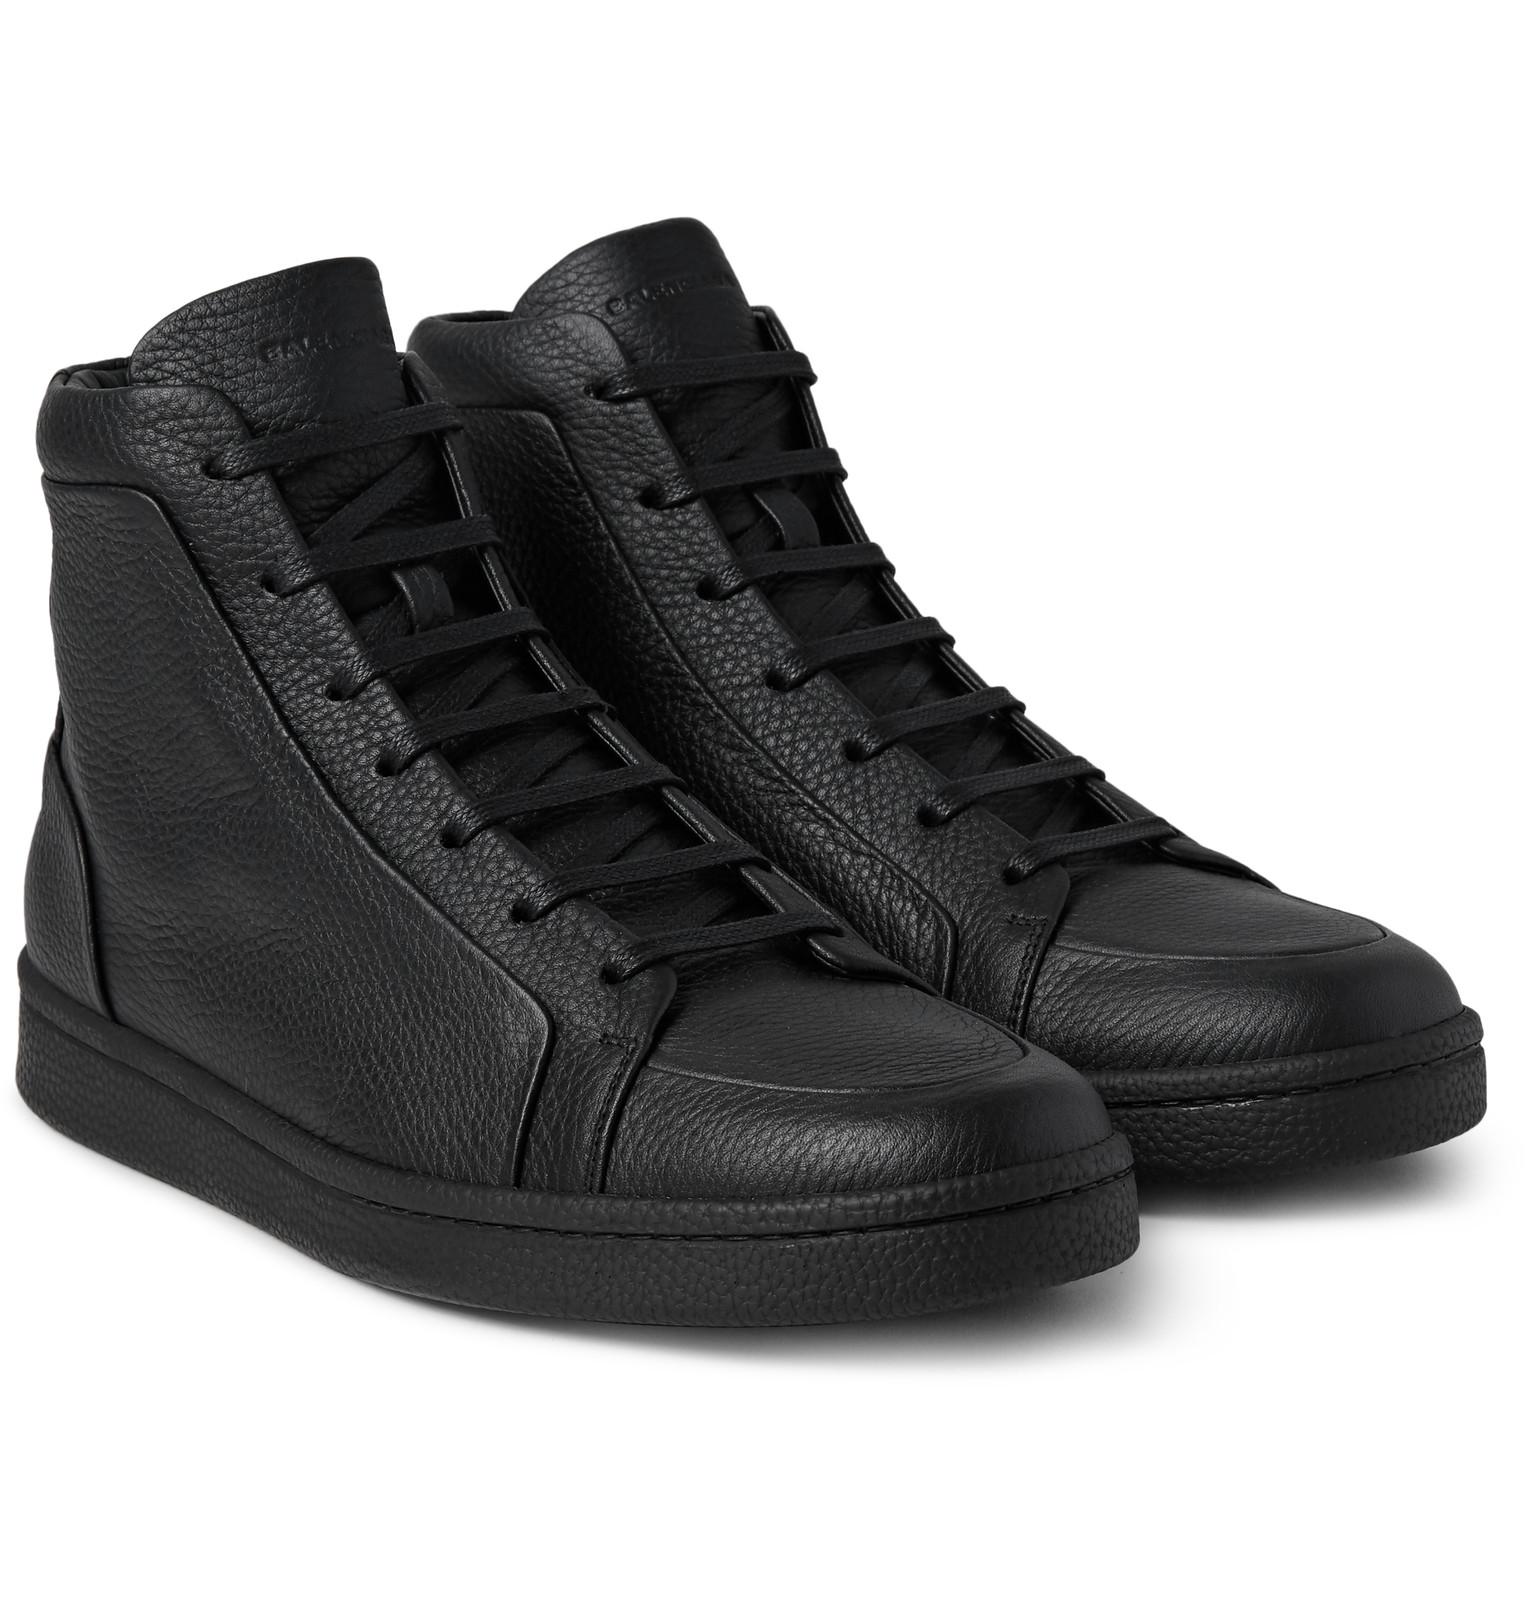 Balenciaga Full-grain Leather High-top Sneakers in Black for Men - Lyst